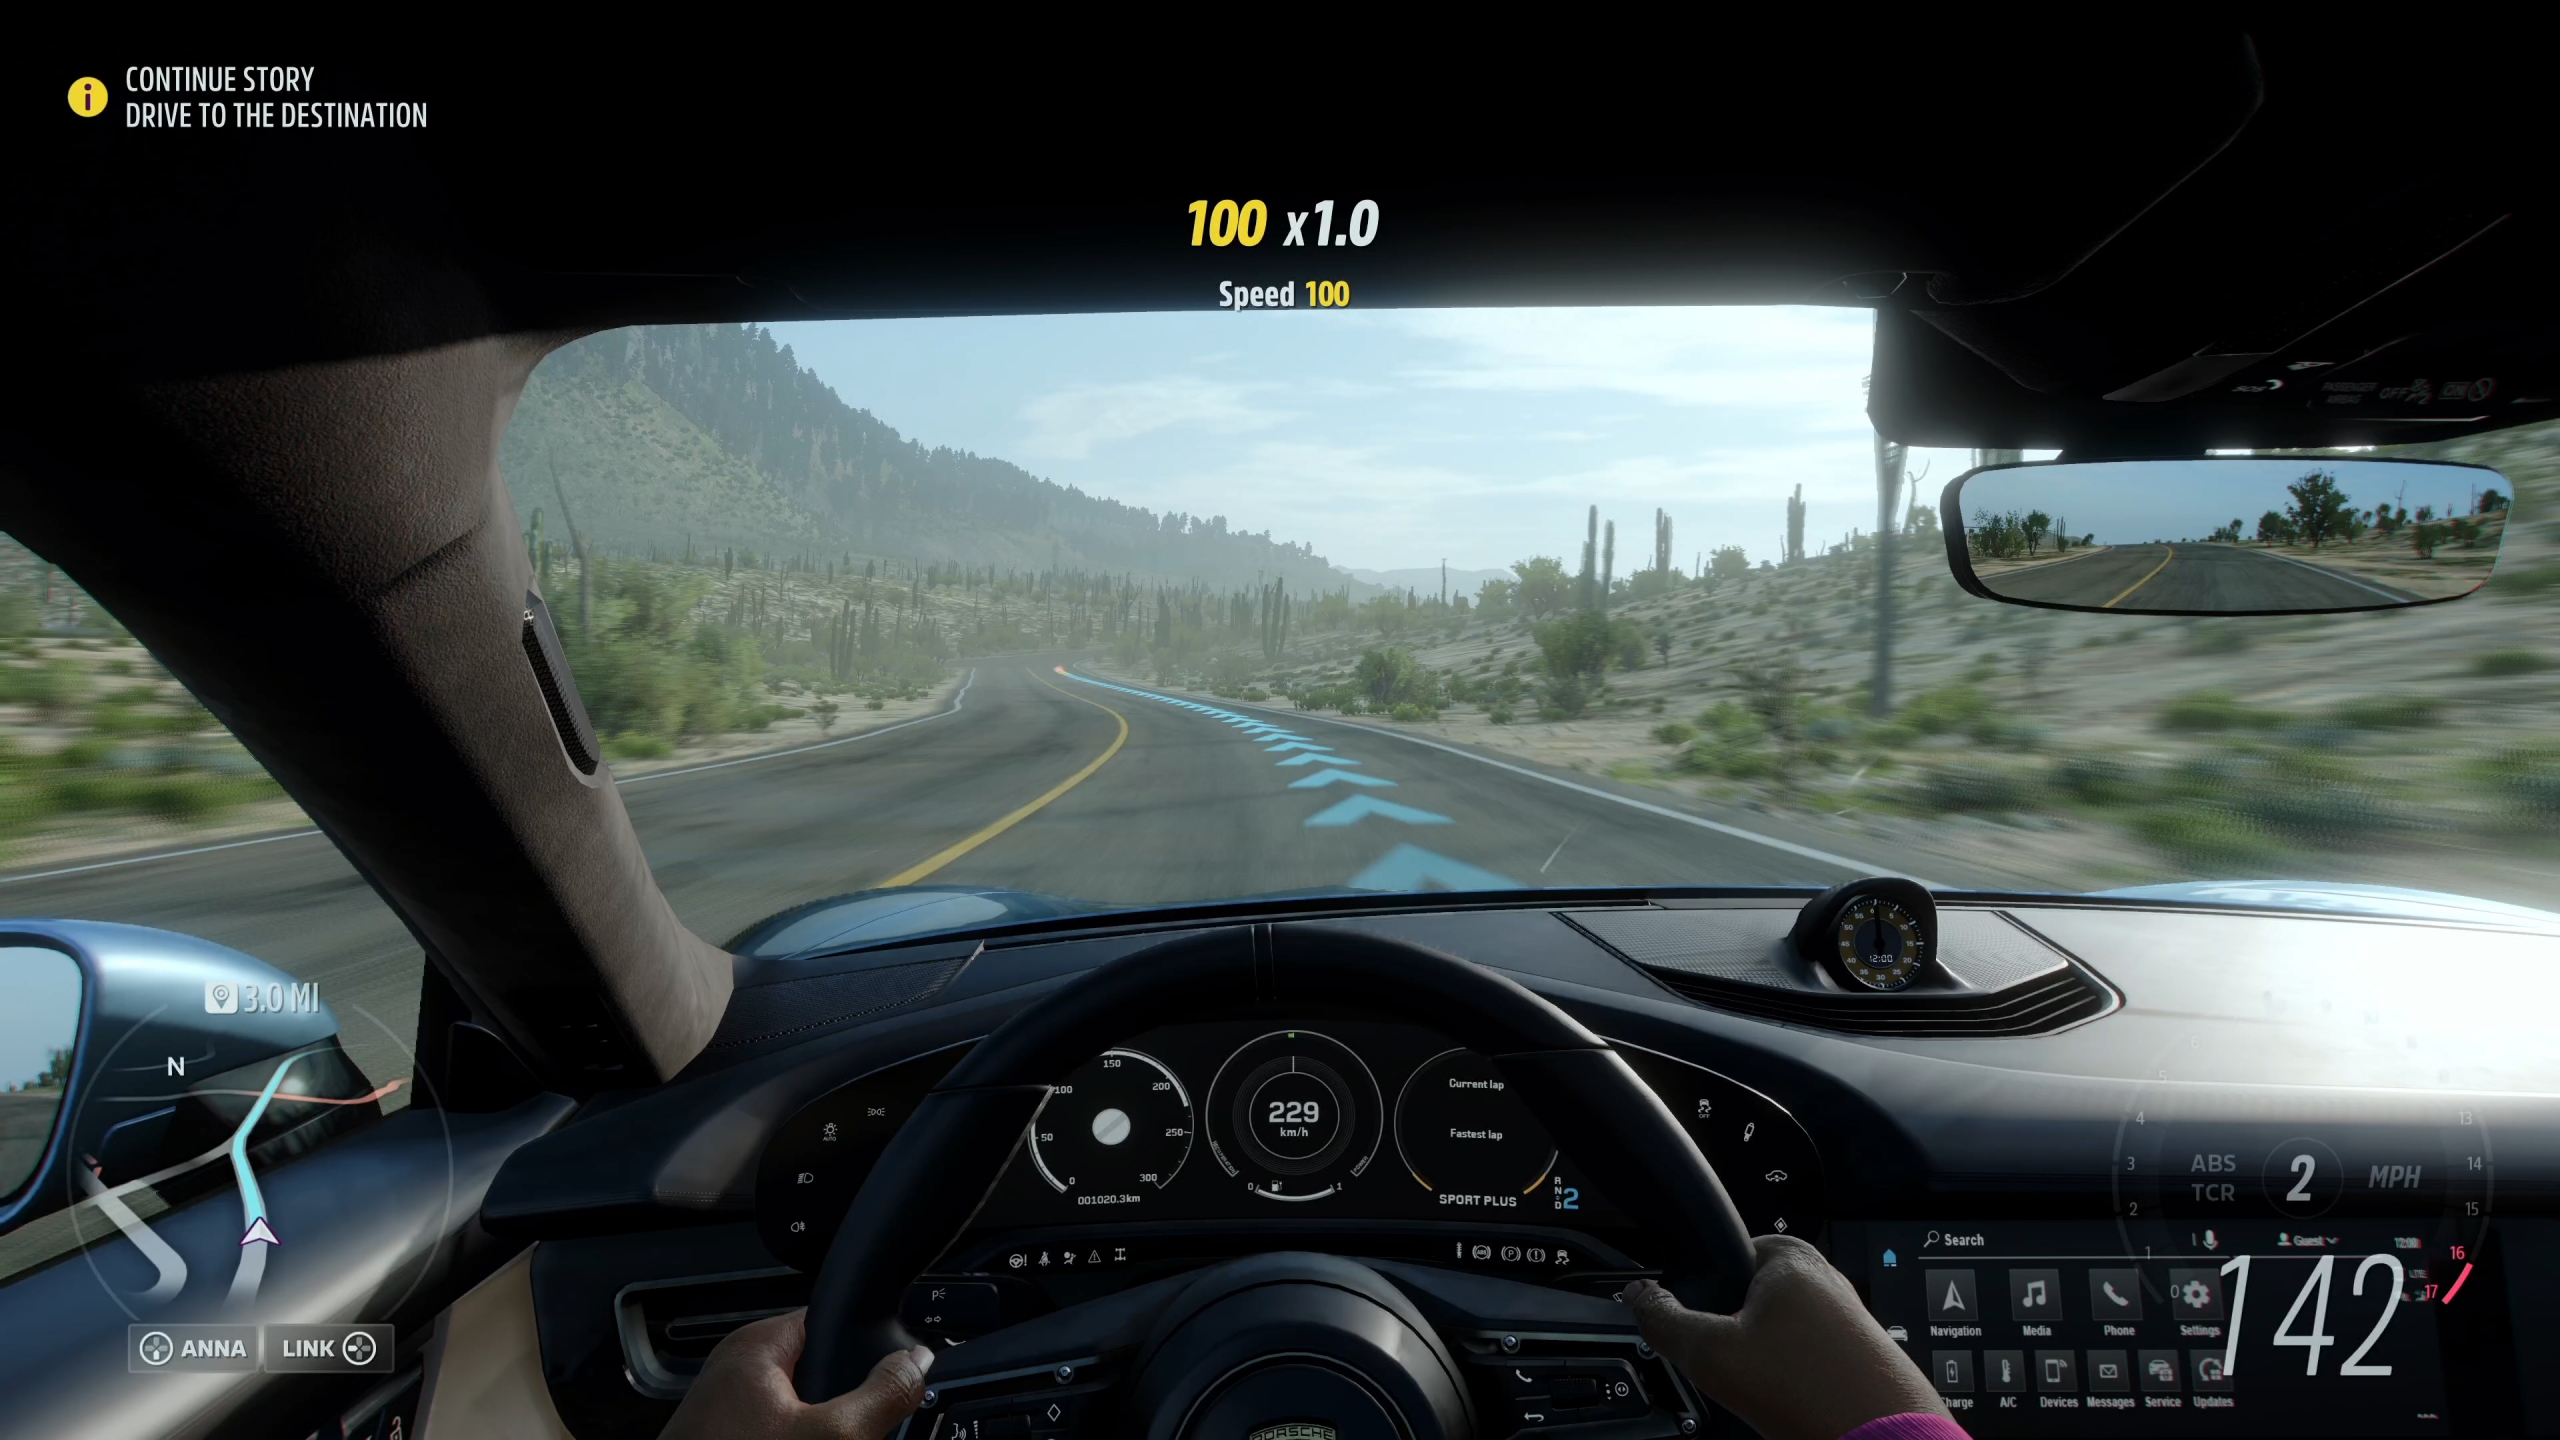 The open road meets dubstep-laced stereotypes in Forza Horizon (review)